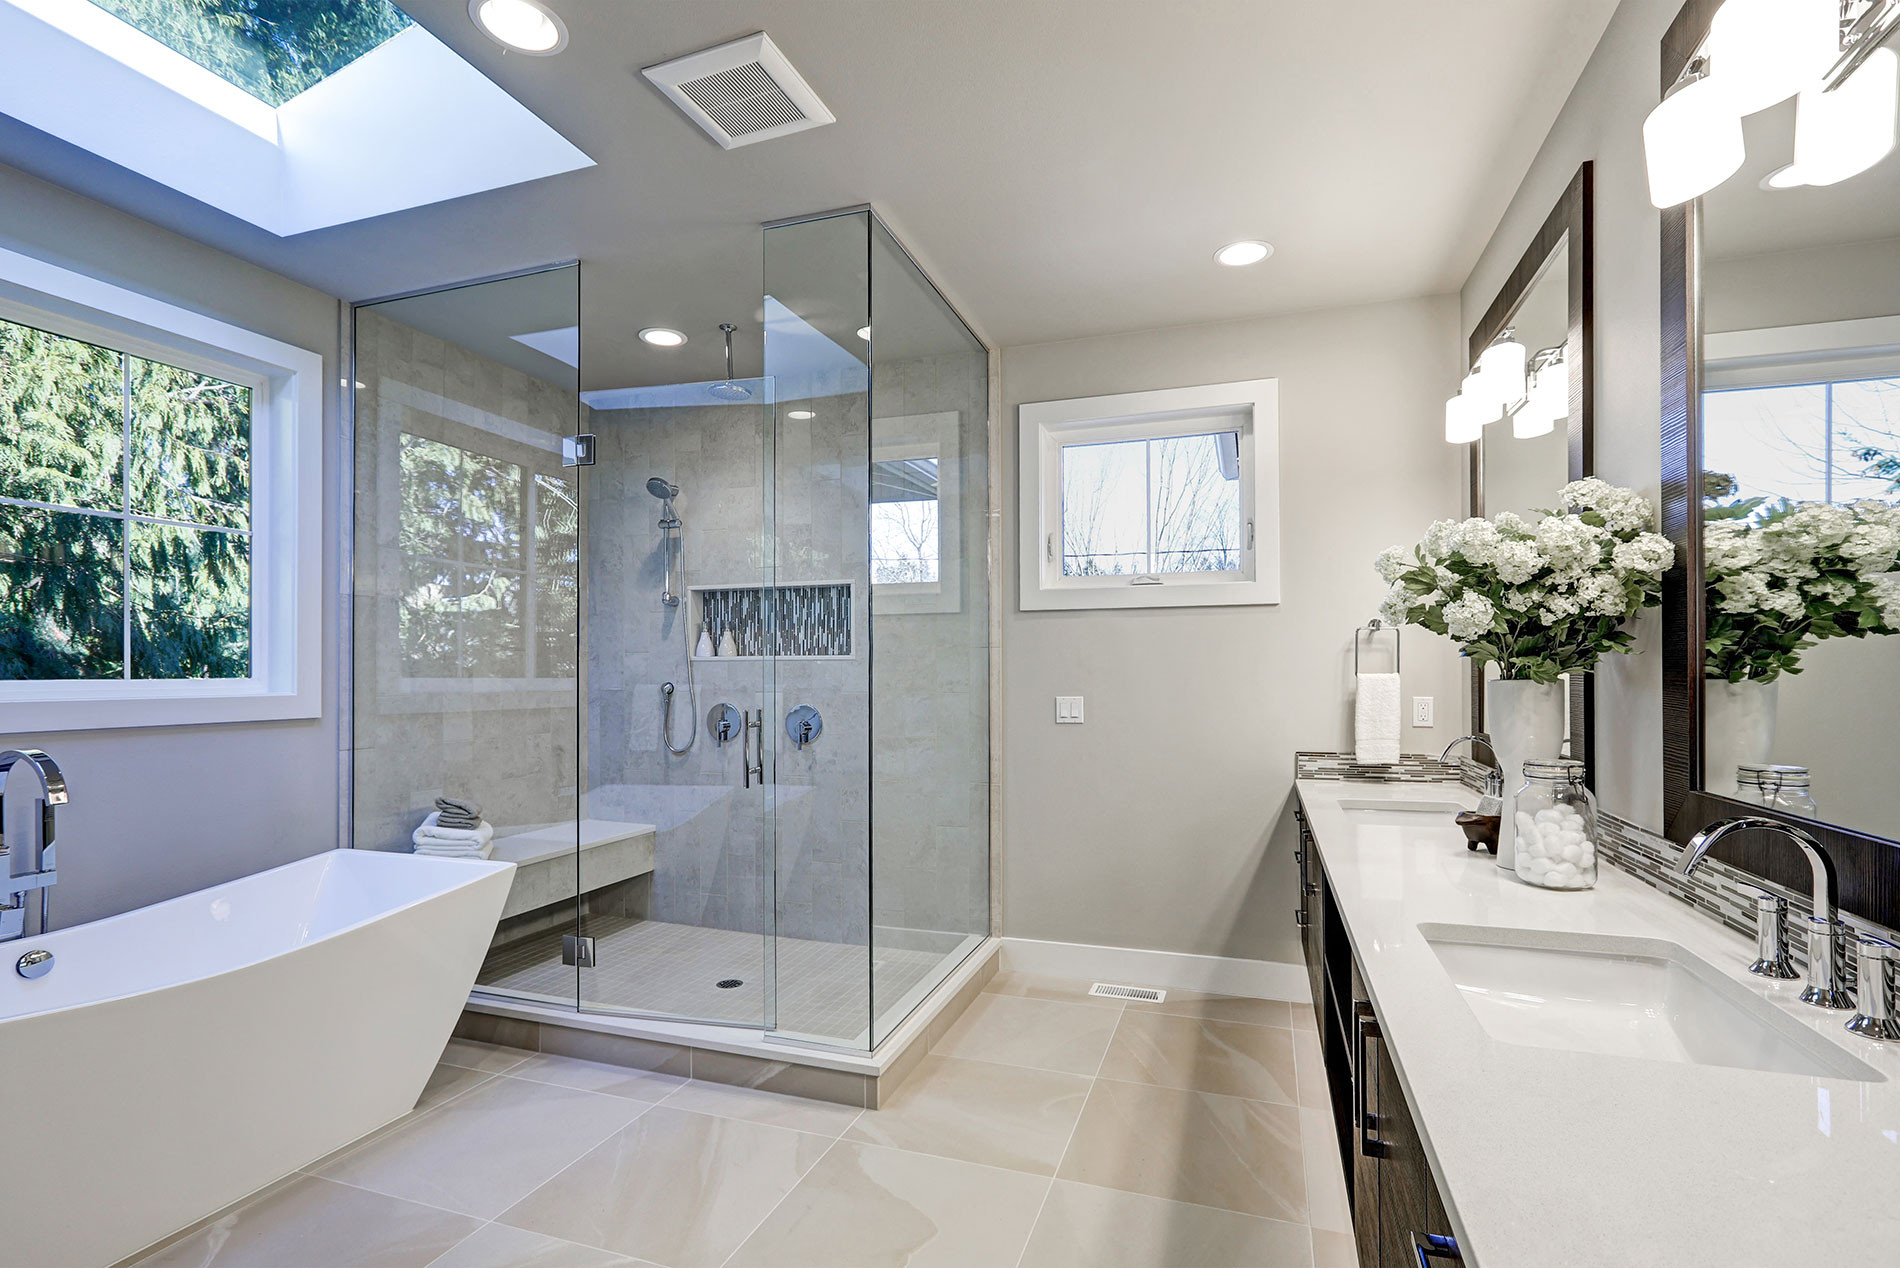 Master Bathroom Remodel
 Average Cost of a Master Bathroom Remodel